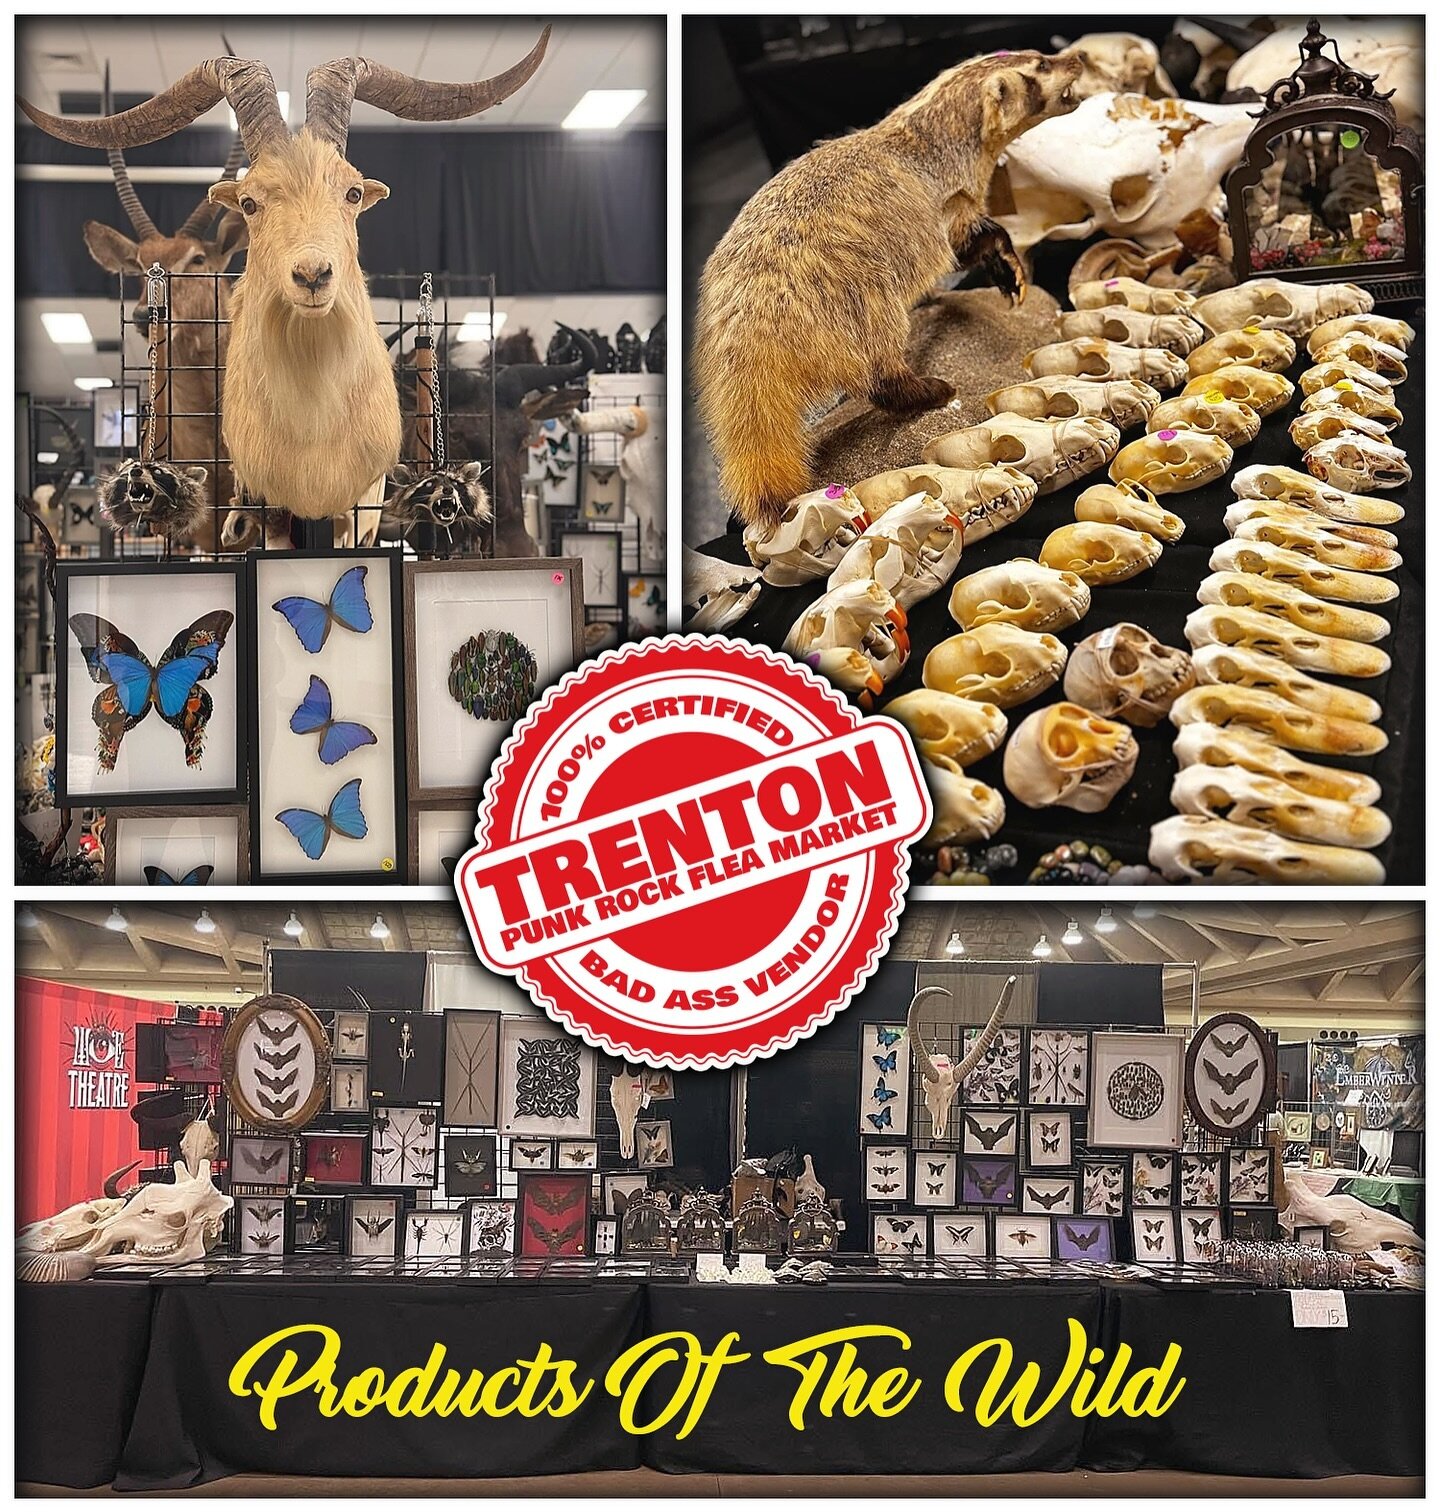 🐞🦋 TRAVERSING TAXIDERMY TITANS TAKE ON THE TPRFM! 🦋🐞

Firing up the wheels and packing up the van with ethically-sourced articulated bones, taxidermy, animal skulls, wet specimens, preserved bugs and more&hellip; why it&rsquo;s just your average 